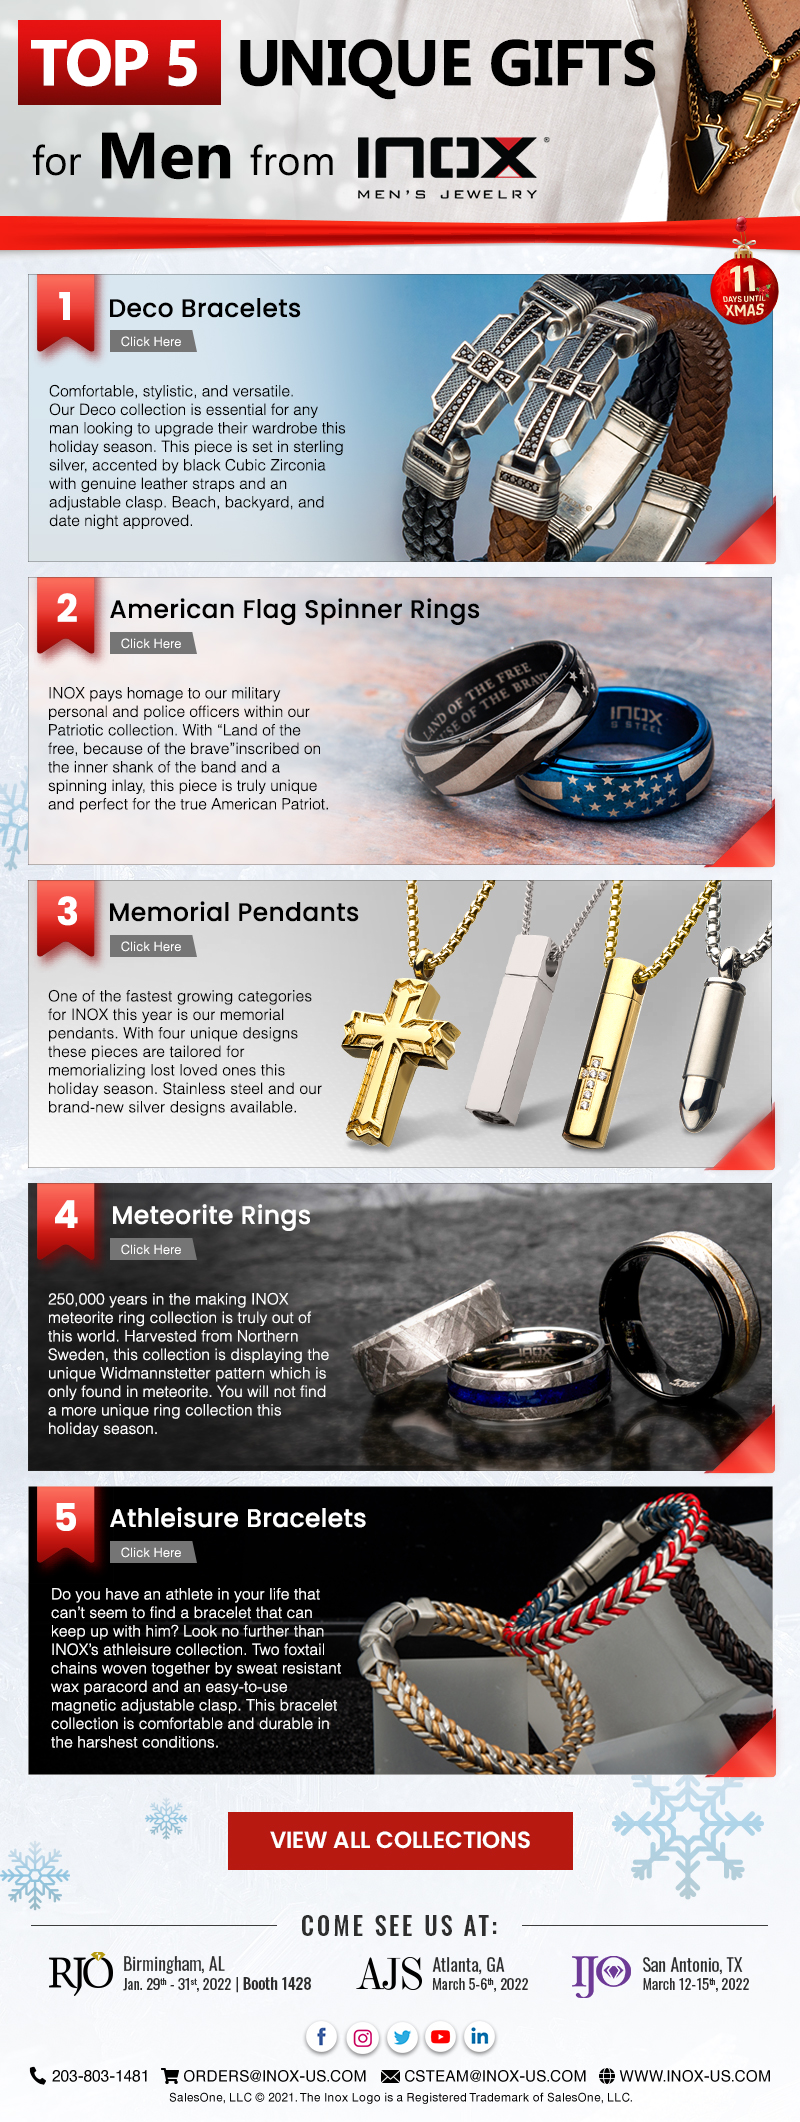 Top 5 Unique Gifts for Men from INOX